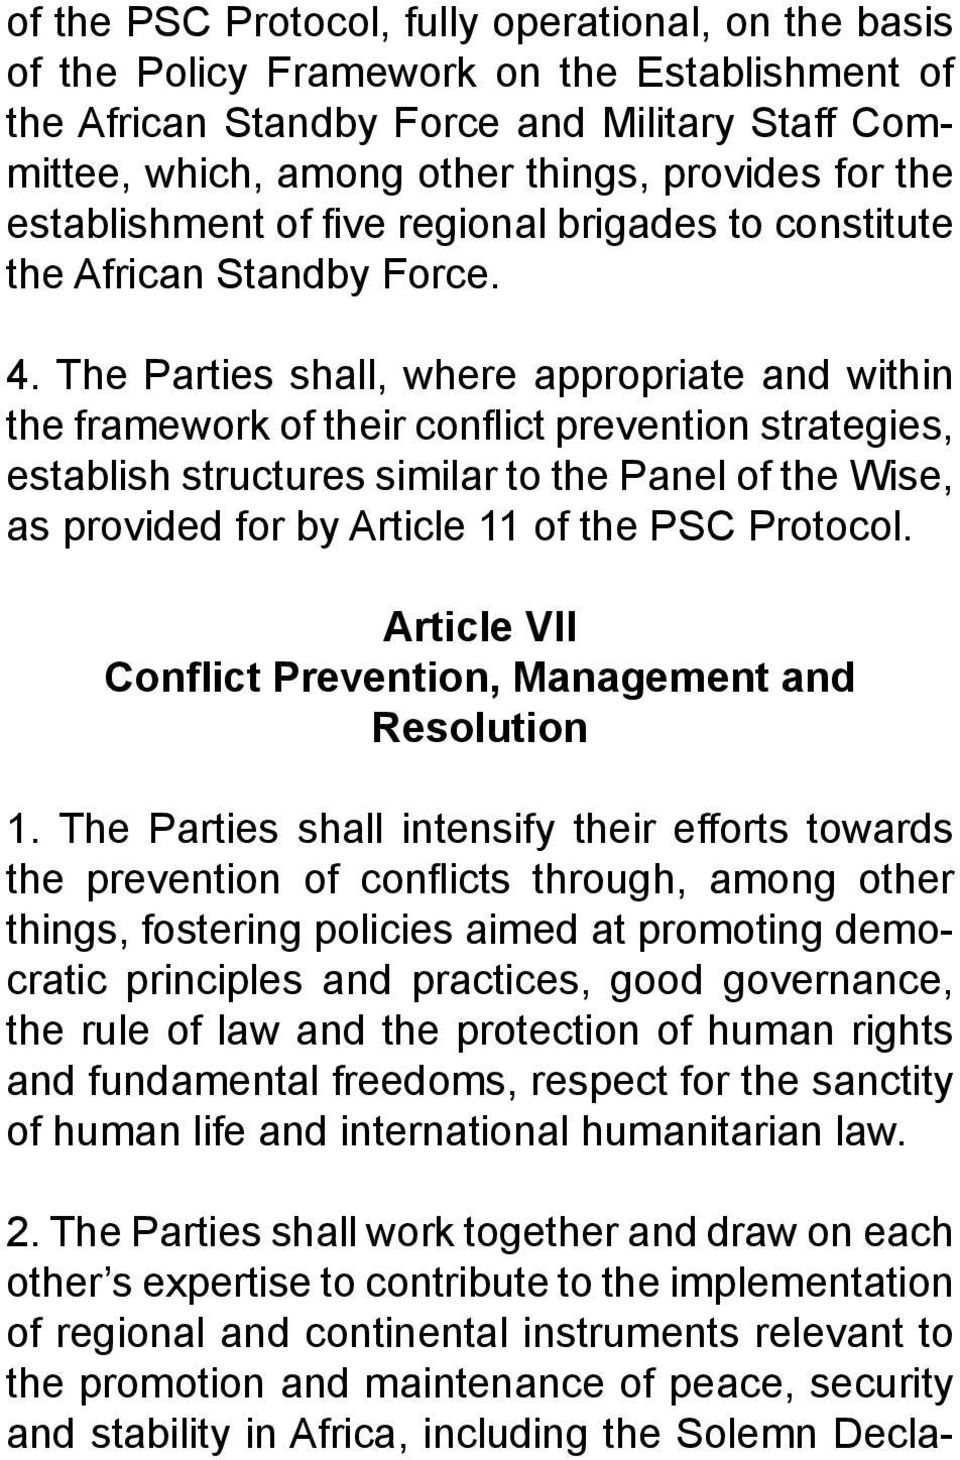 The Parties shall, where appropriate and within the framework of their conflict prevention strategies, establish structures similar to the Panel of the Wise, as provided for by Article 11 of the PSC